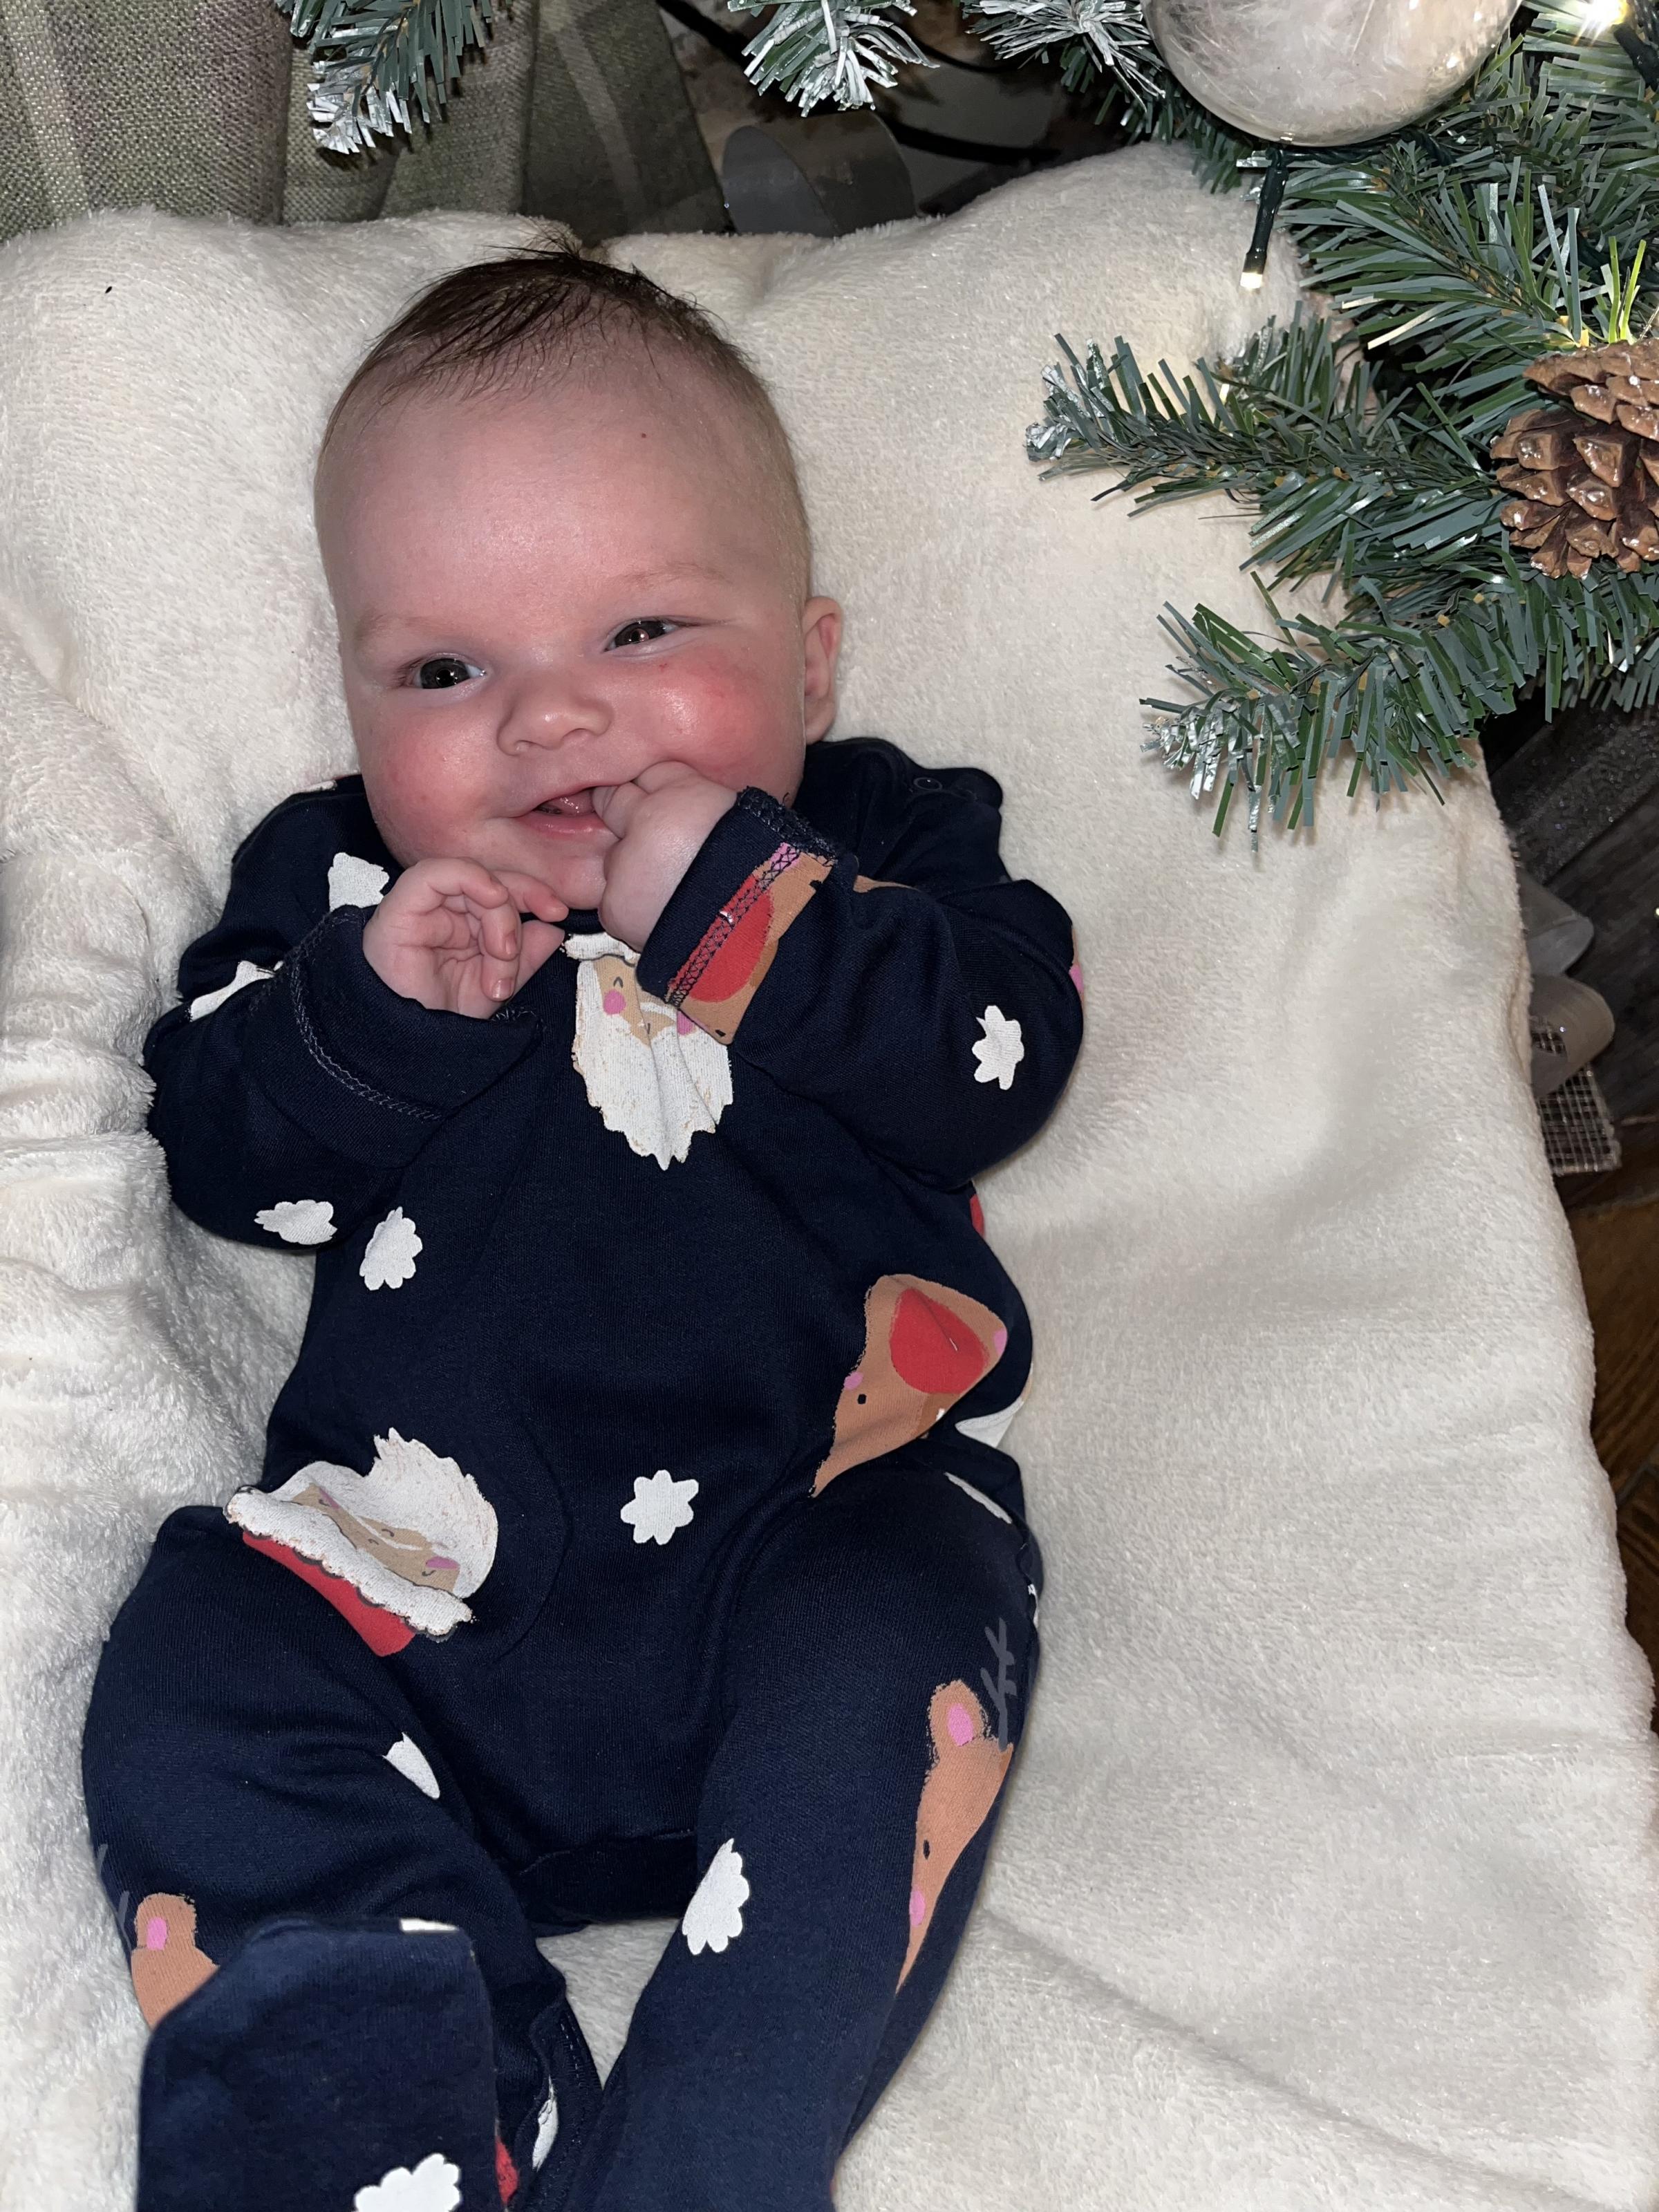 Rhiannon Williams, from Wrexham: Big smiles because three-month-old Ezra is matching with his big brother and sister in their Christmas pyjamas.